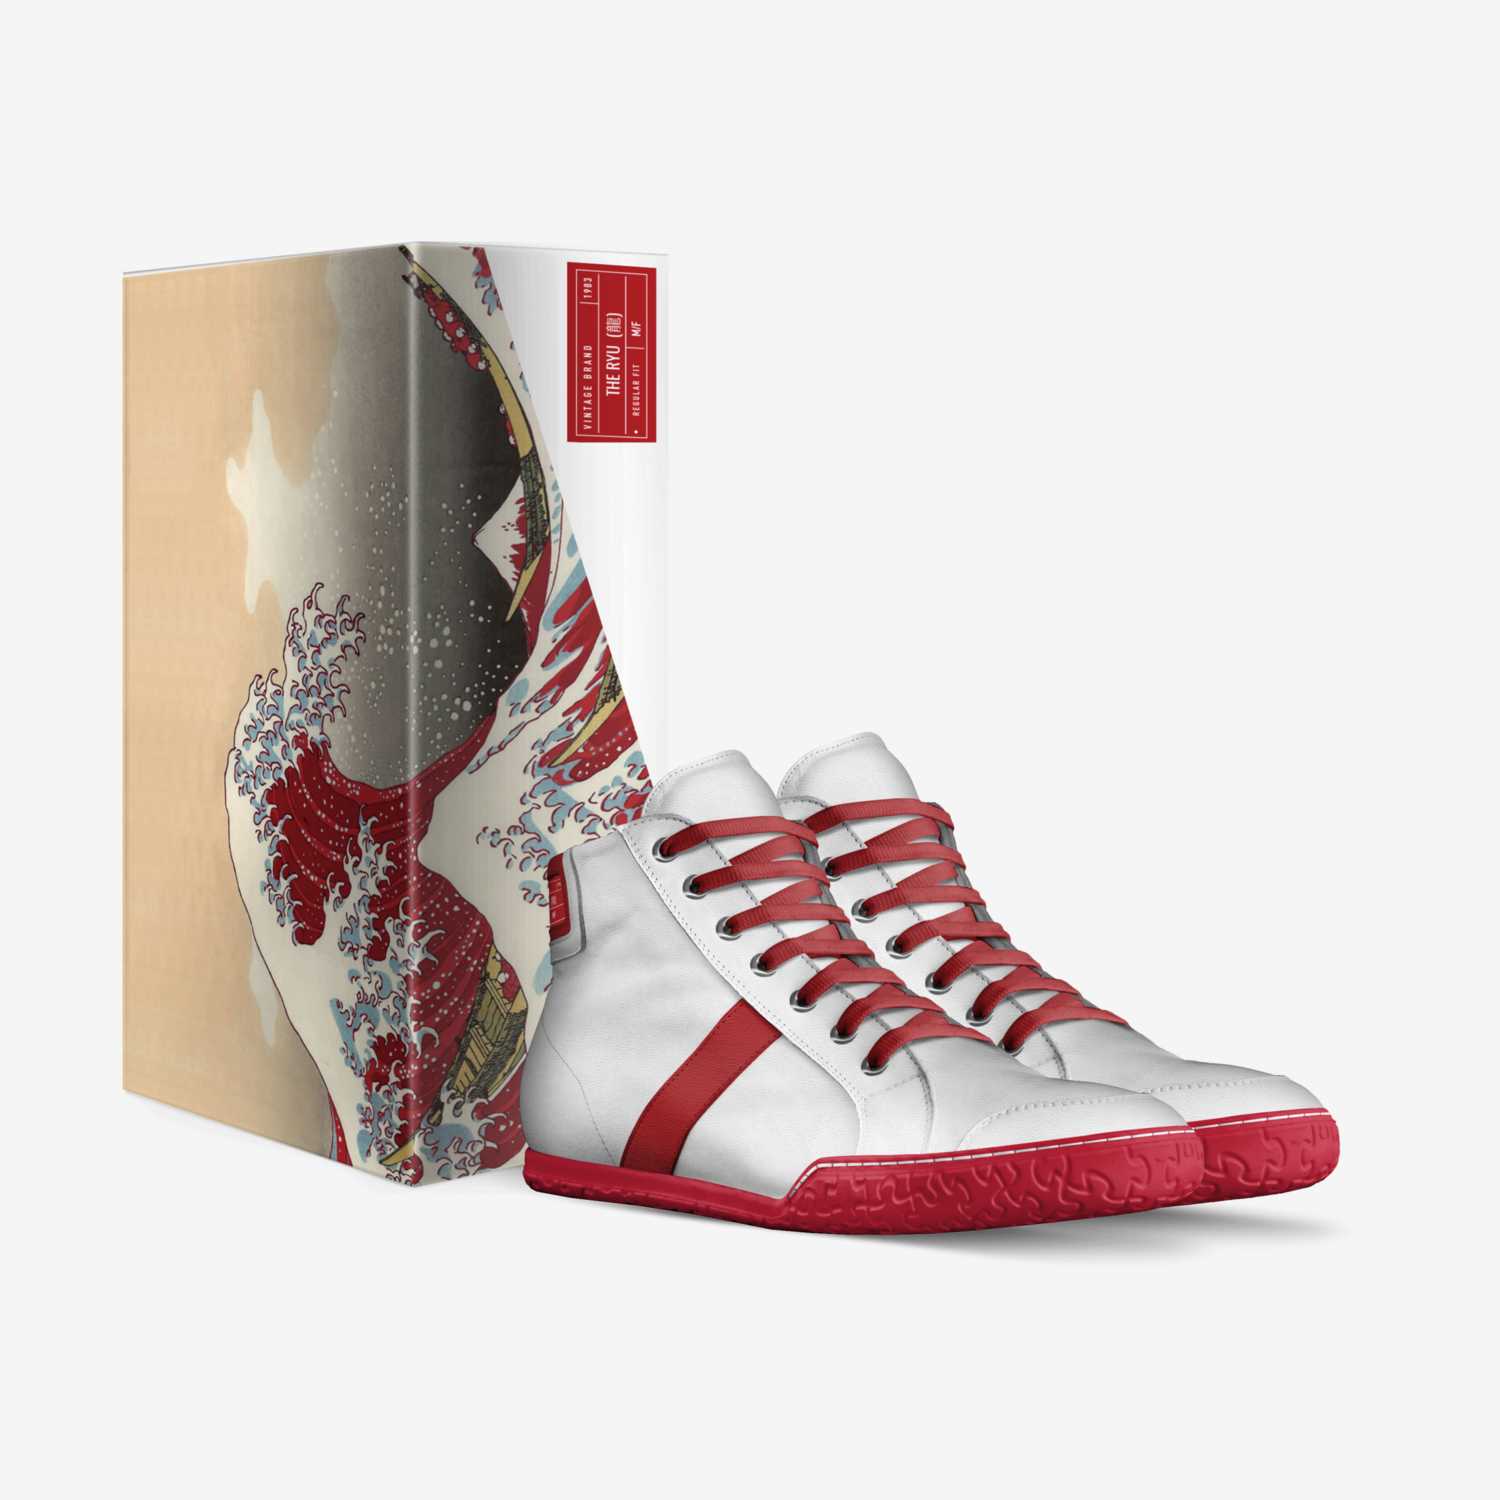 The Ryu  (龍) custom made in Italy shoes by Eric Robinson | Box view